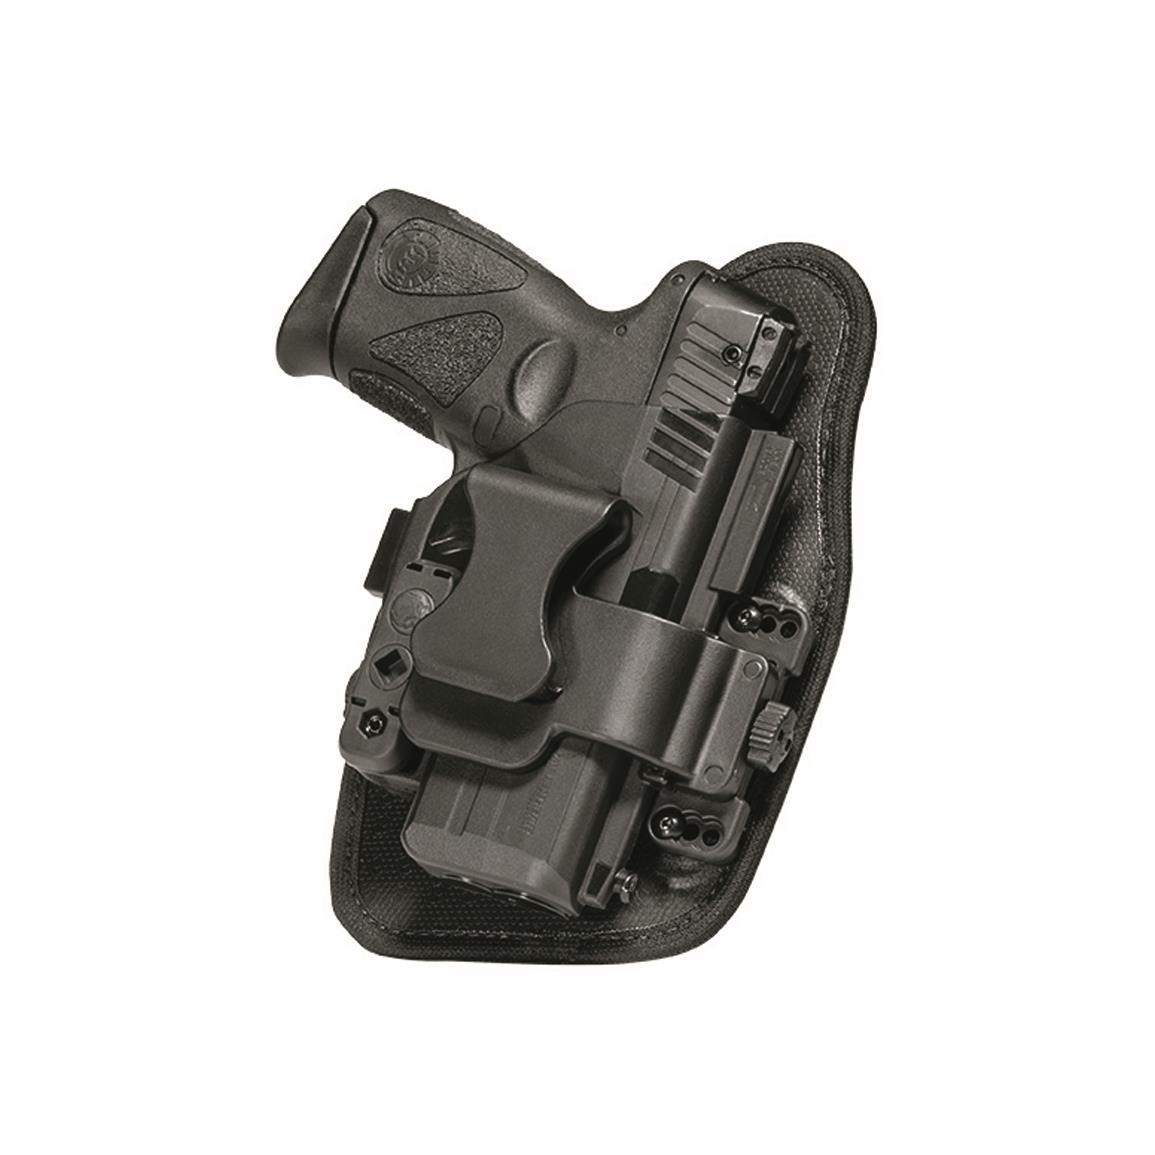 Alien Gear ShapeShift Appendix Carry Holster, Smith & Wesson M&P9 Shield